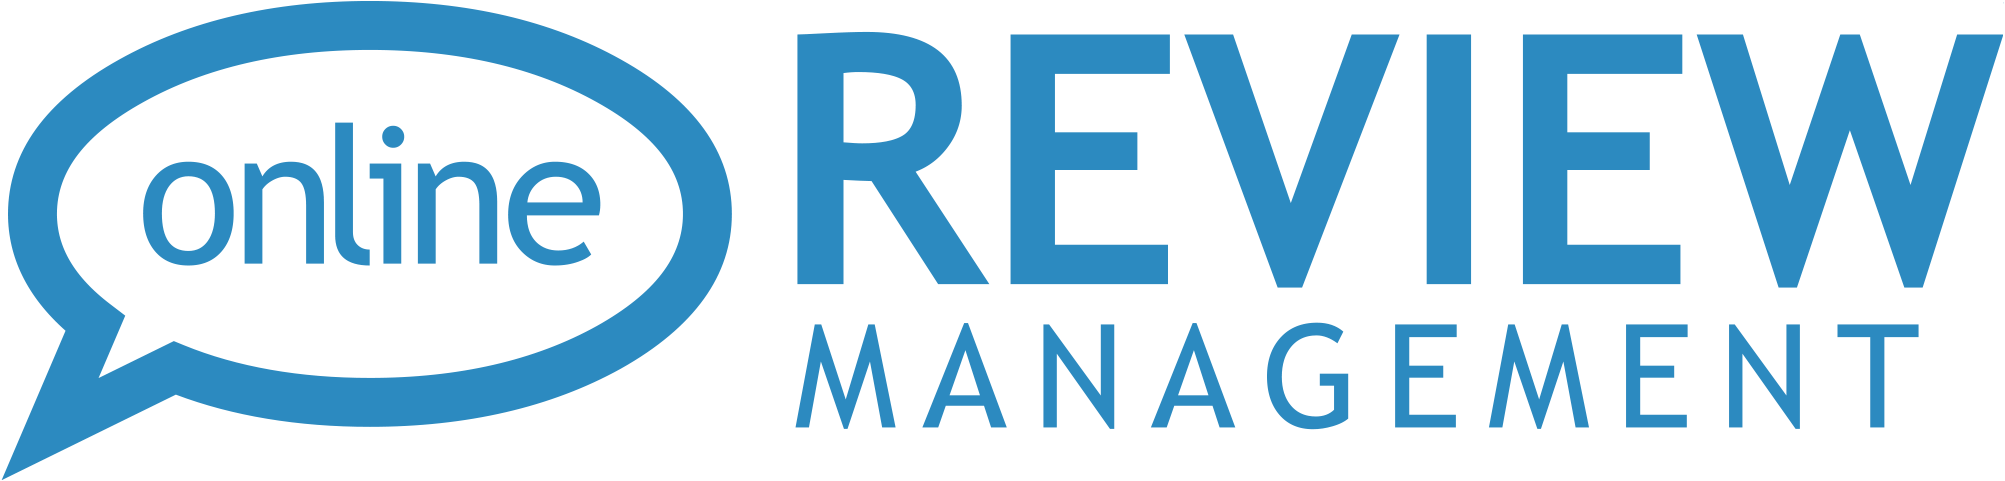 Review Manager